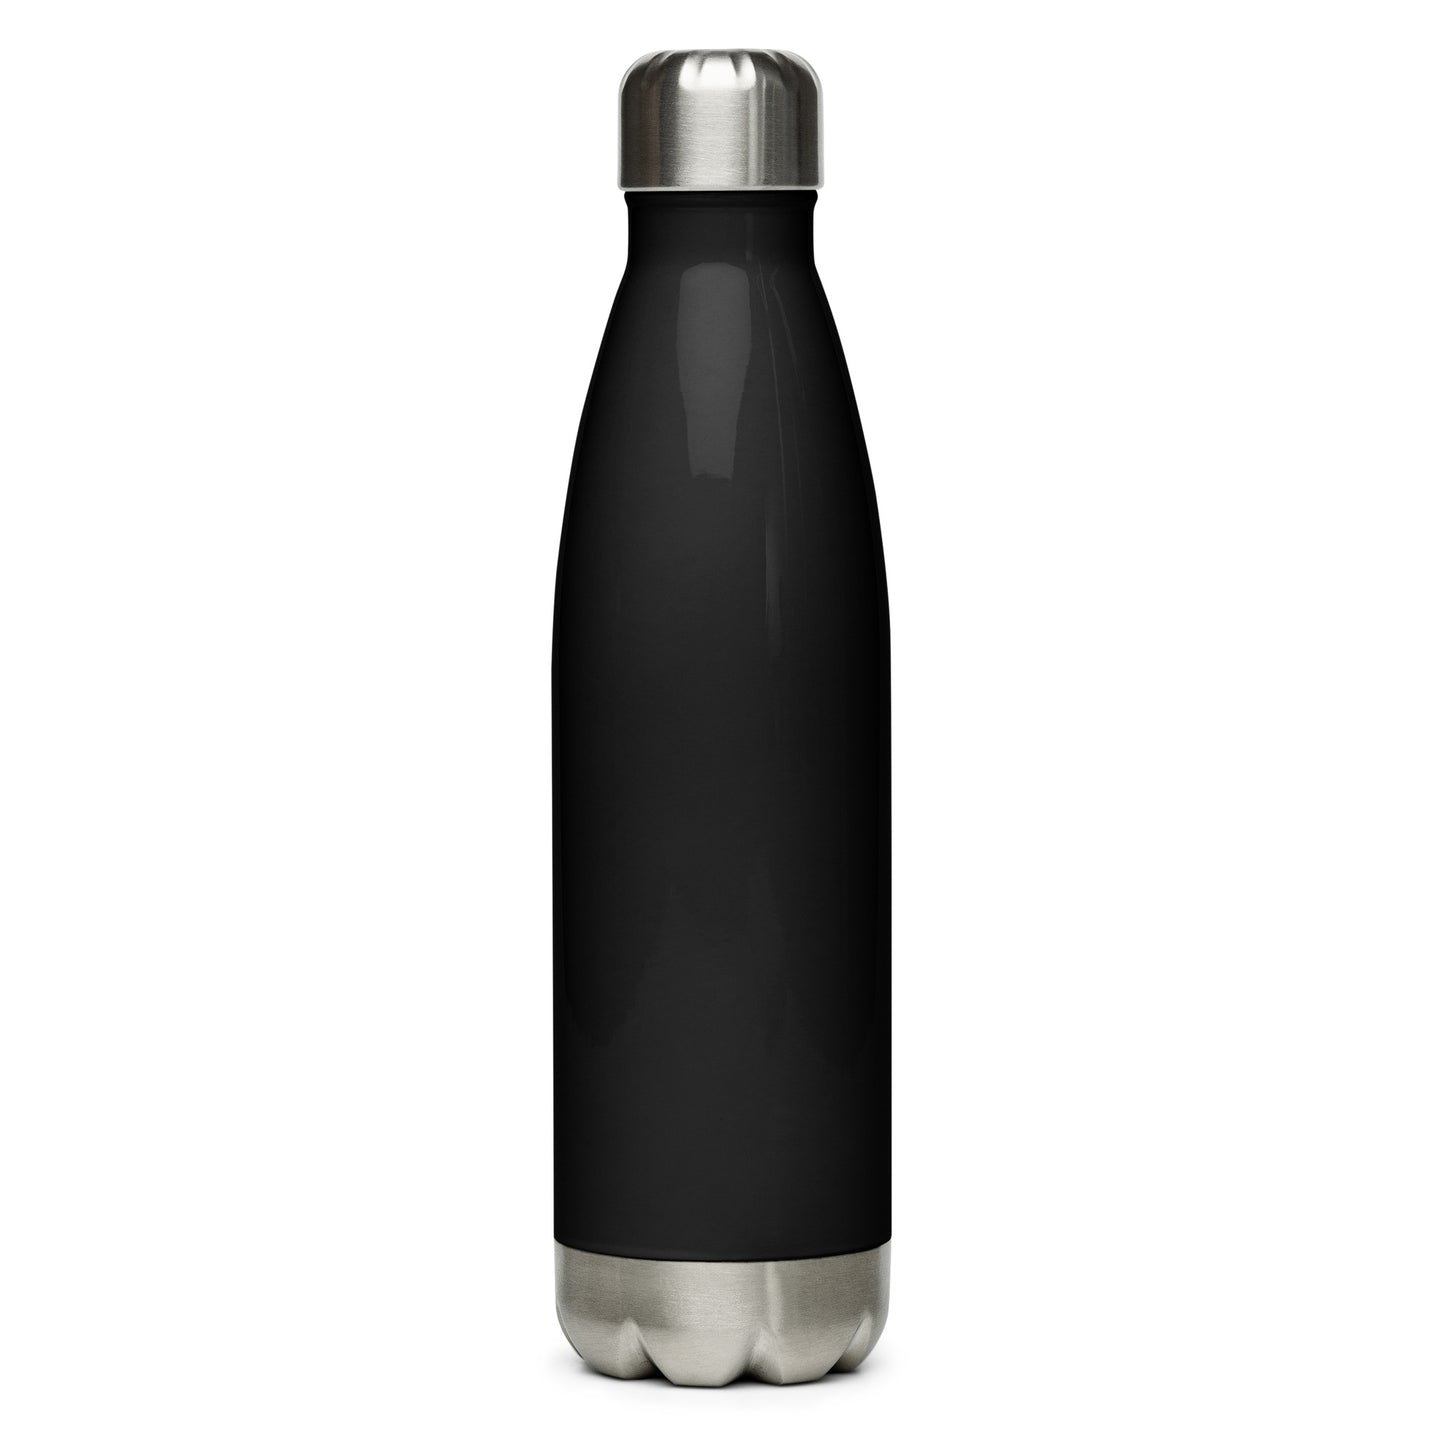 Scribes & Vibes Logo Stainless Steel Water Bottle - 17 fl oz